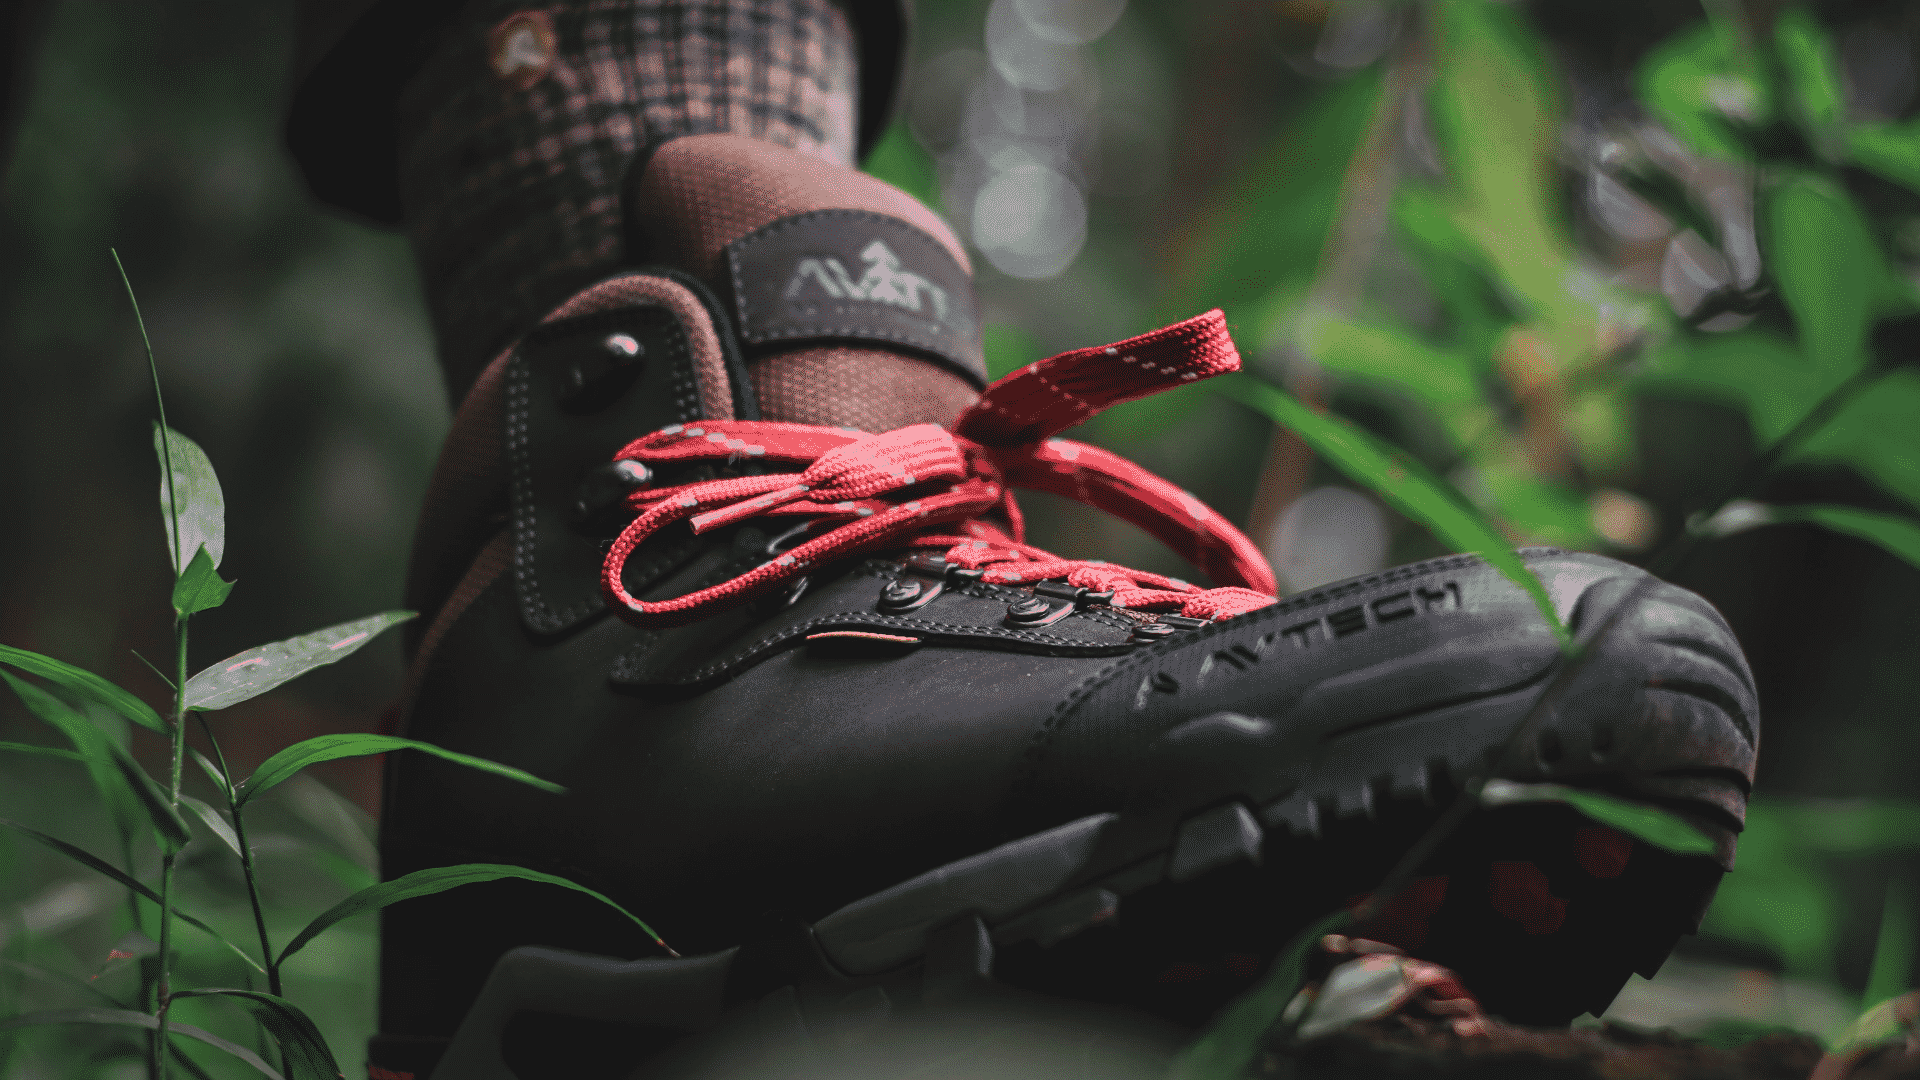 Why Do Hiking Boots Have Red Laces? Red Laced Hiking Boots Explained ...